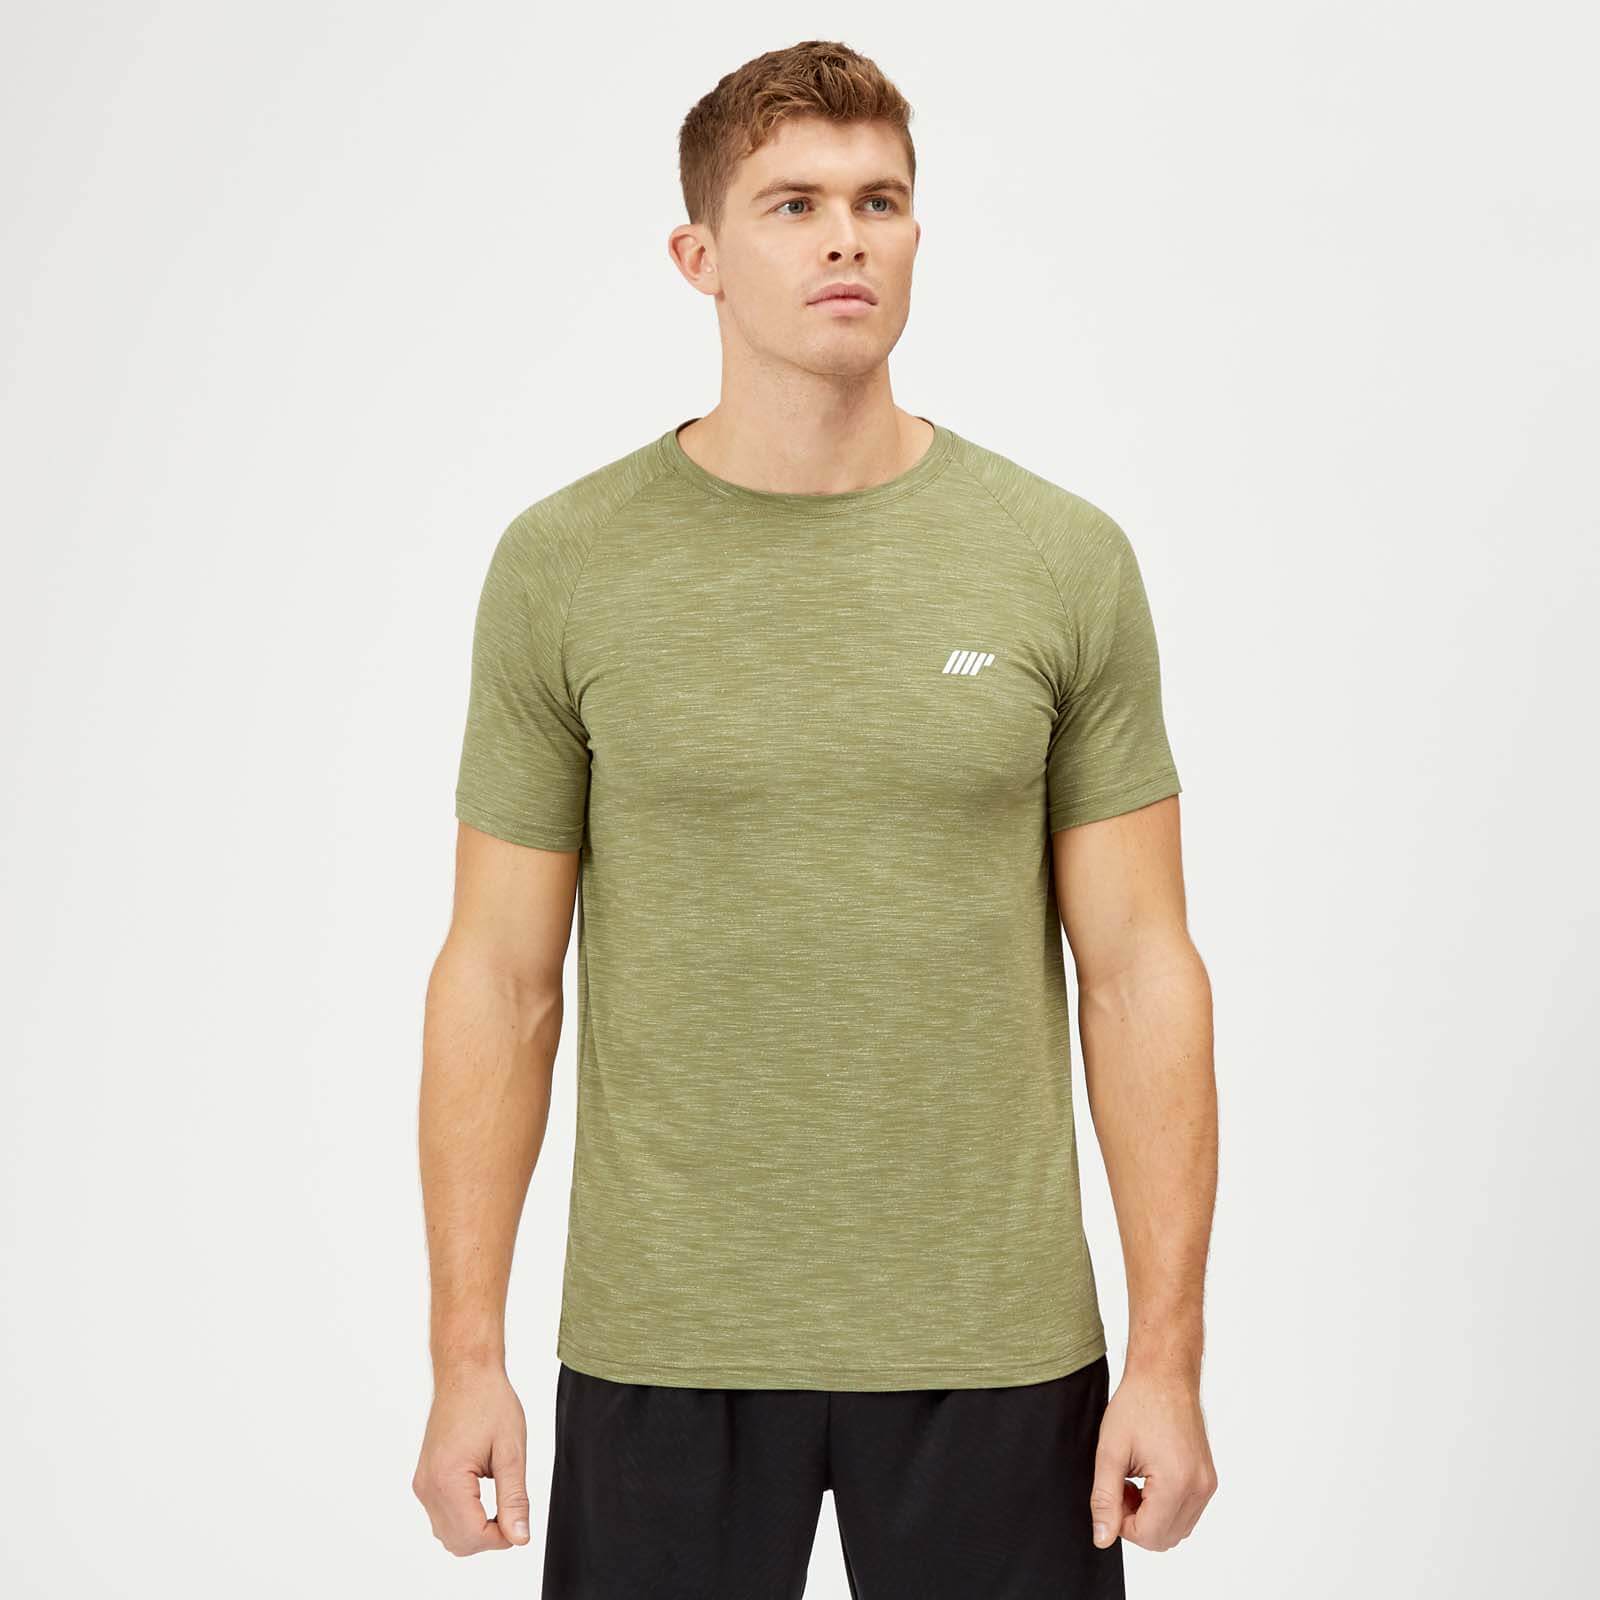 Limited Edition Performance T-Shirt - Light Olive